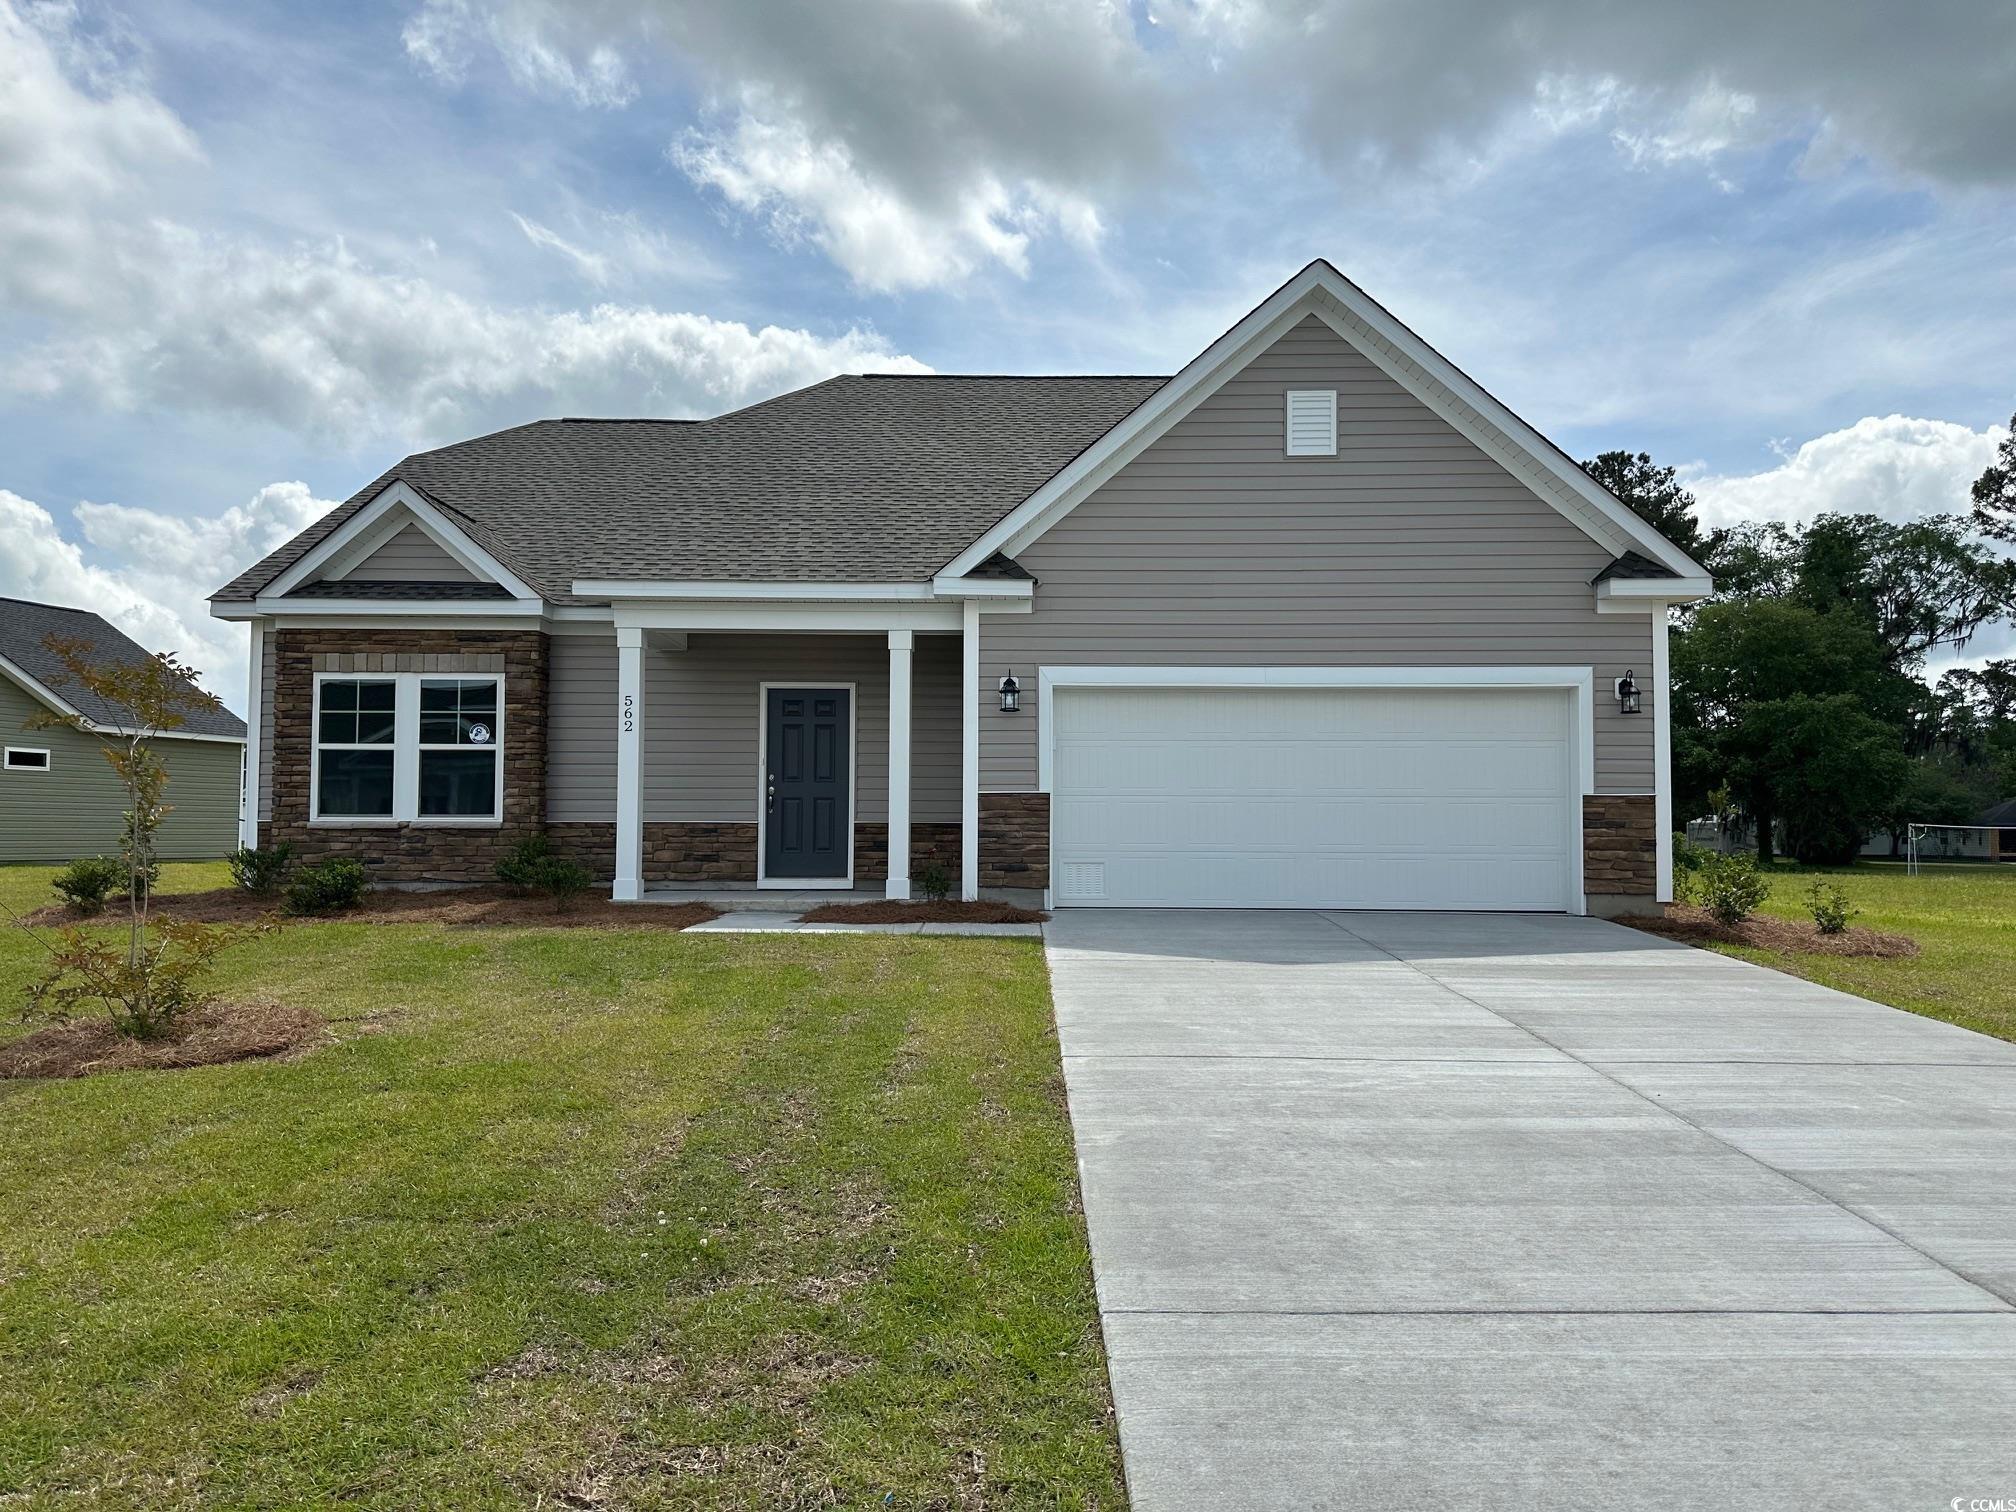 all photos used are stock photos of the same home model from other communities. grissett landing is located approximately 4 miles from historic downtown conway with unique storefronts and eateries. this is a 1.5 story home featuring an open concept floor plan on the 1st floor. the owner's suite is on the 1st floor. the 2nd floor offers 2 large bedroom, a full bath, and a loft.  grissett offers direct access to the waccamaw river and will feature a floating dock and kayak storage. low hoa fees, great floorplans and nice size homesites! this home is the monaco ii c and located on lot 30.